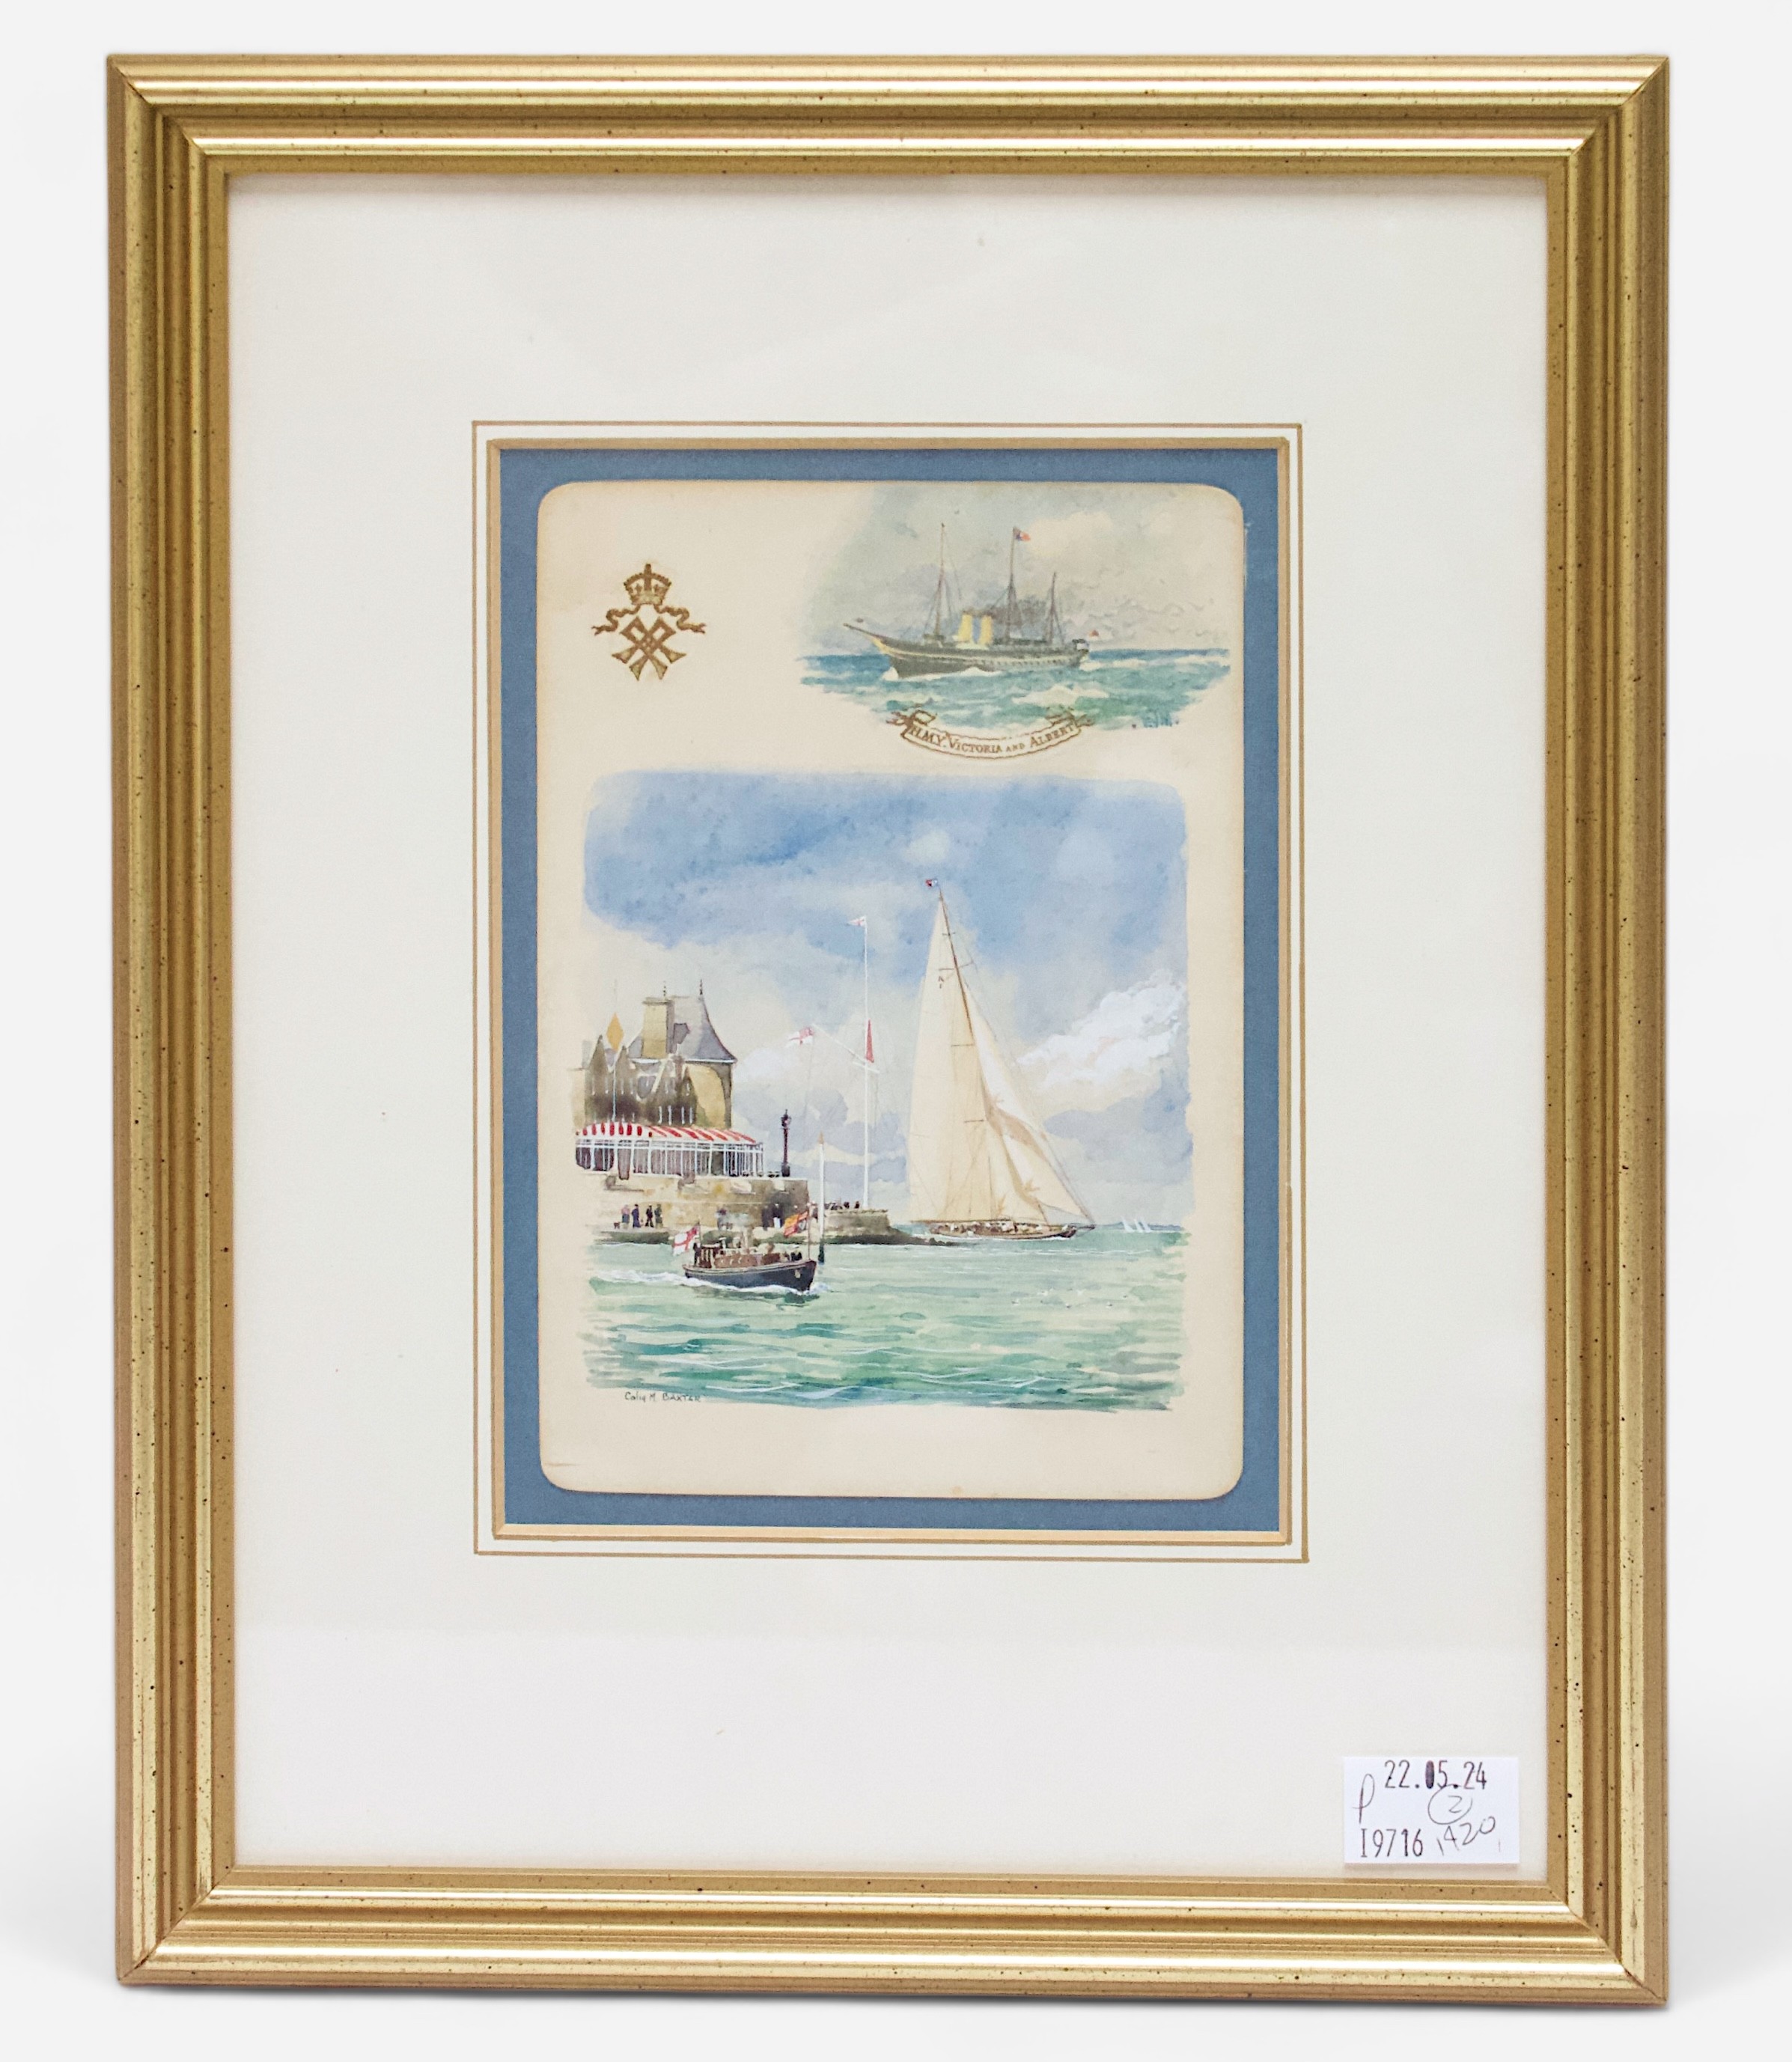 Colin M. Baxter. An original blank menu from the Royal Yacht Victoria & Albert painted with a - Image 2 of 3